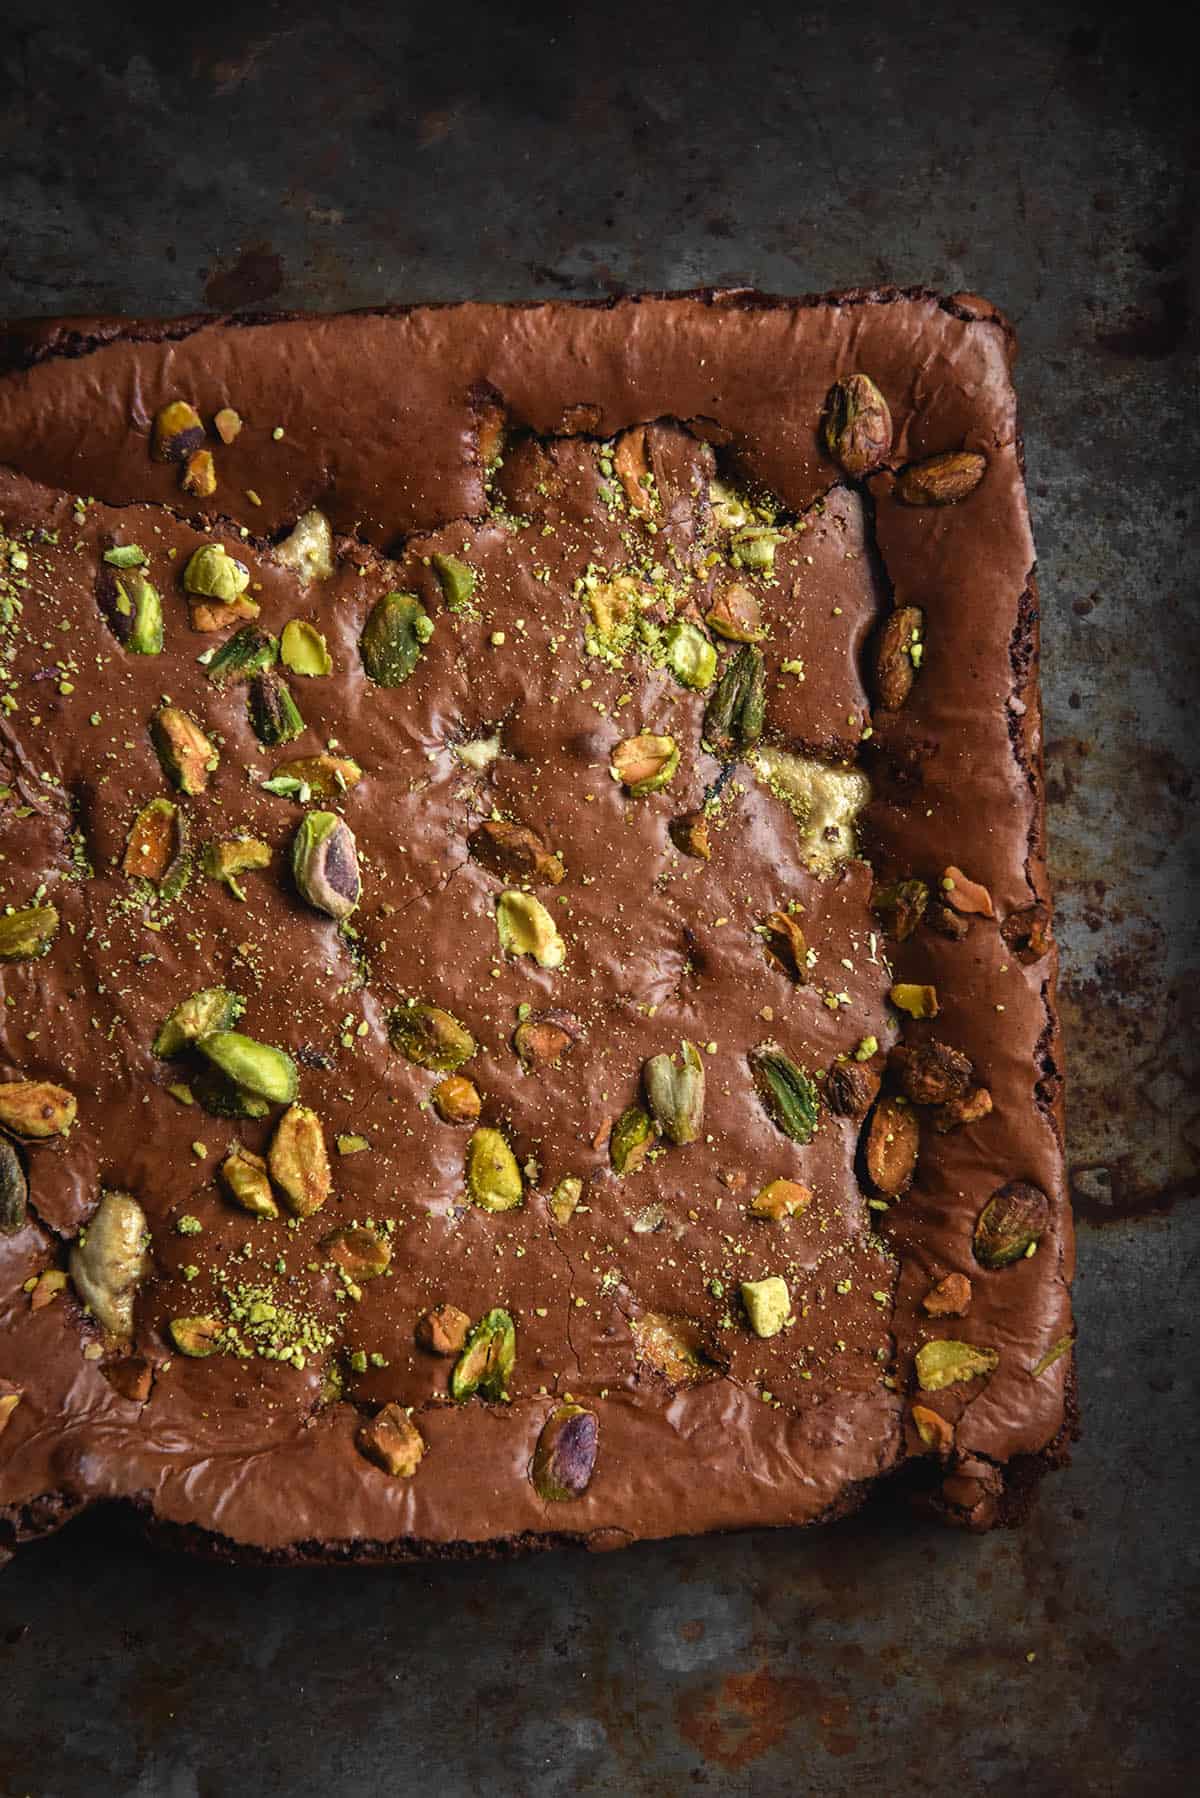 An aerial macro view of a slab of gluten free chocolate brownie filled with pieces of halva and topped with chopped pistachios. The slab sits atop a dark metal rusty backdrop.